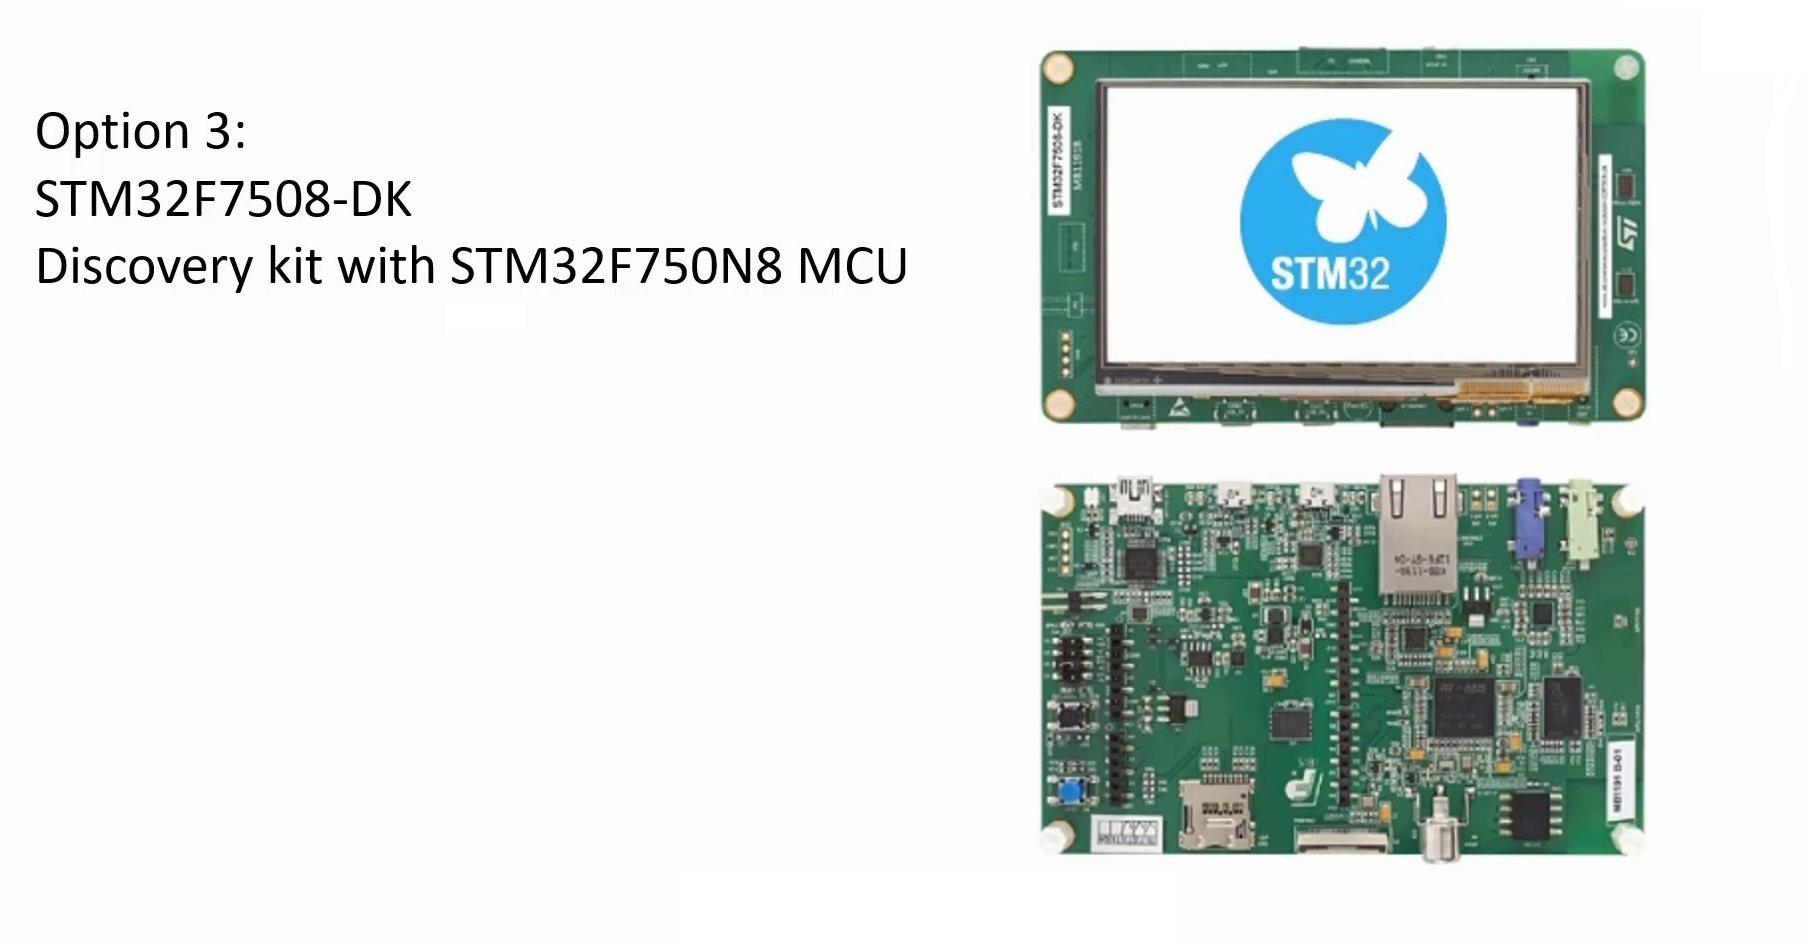  STM32 Discovery boards